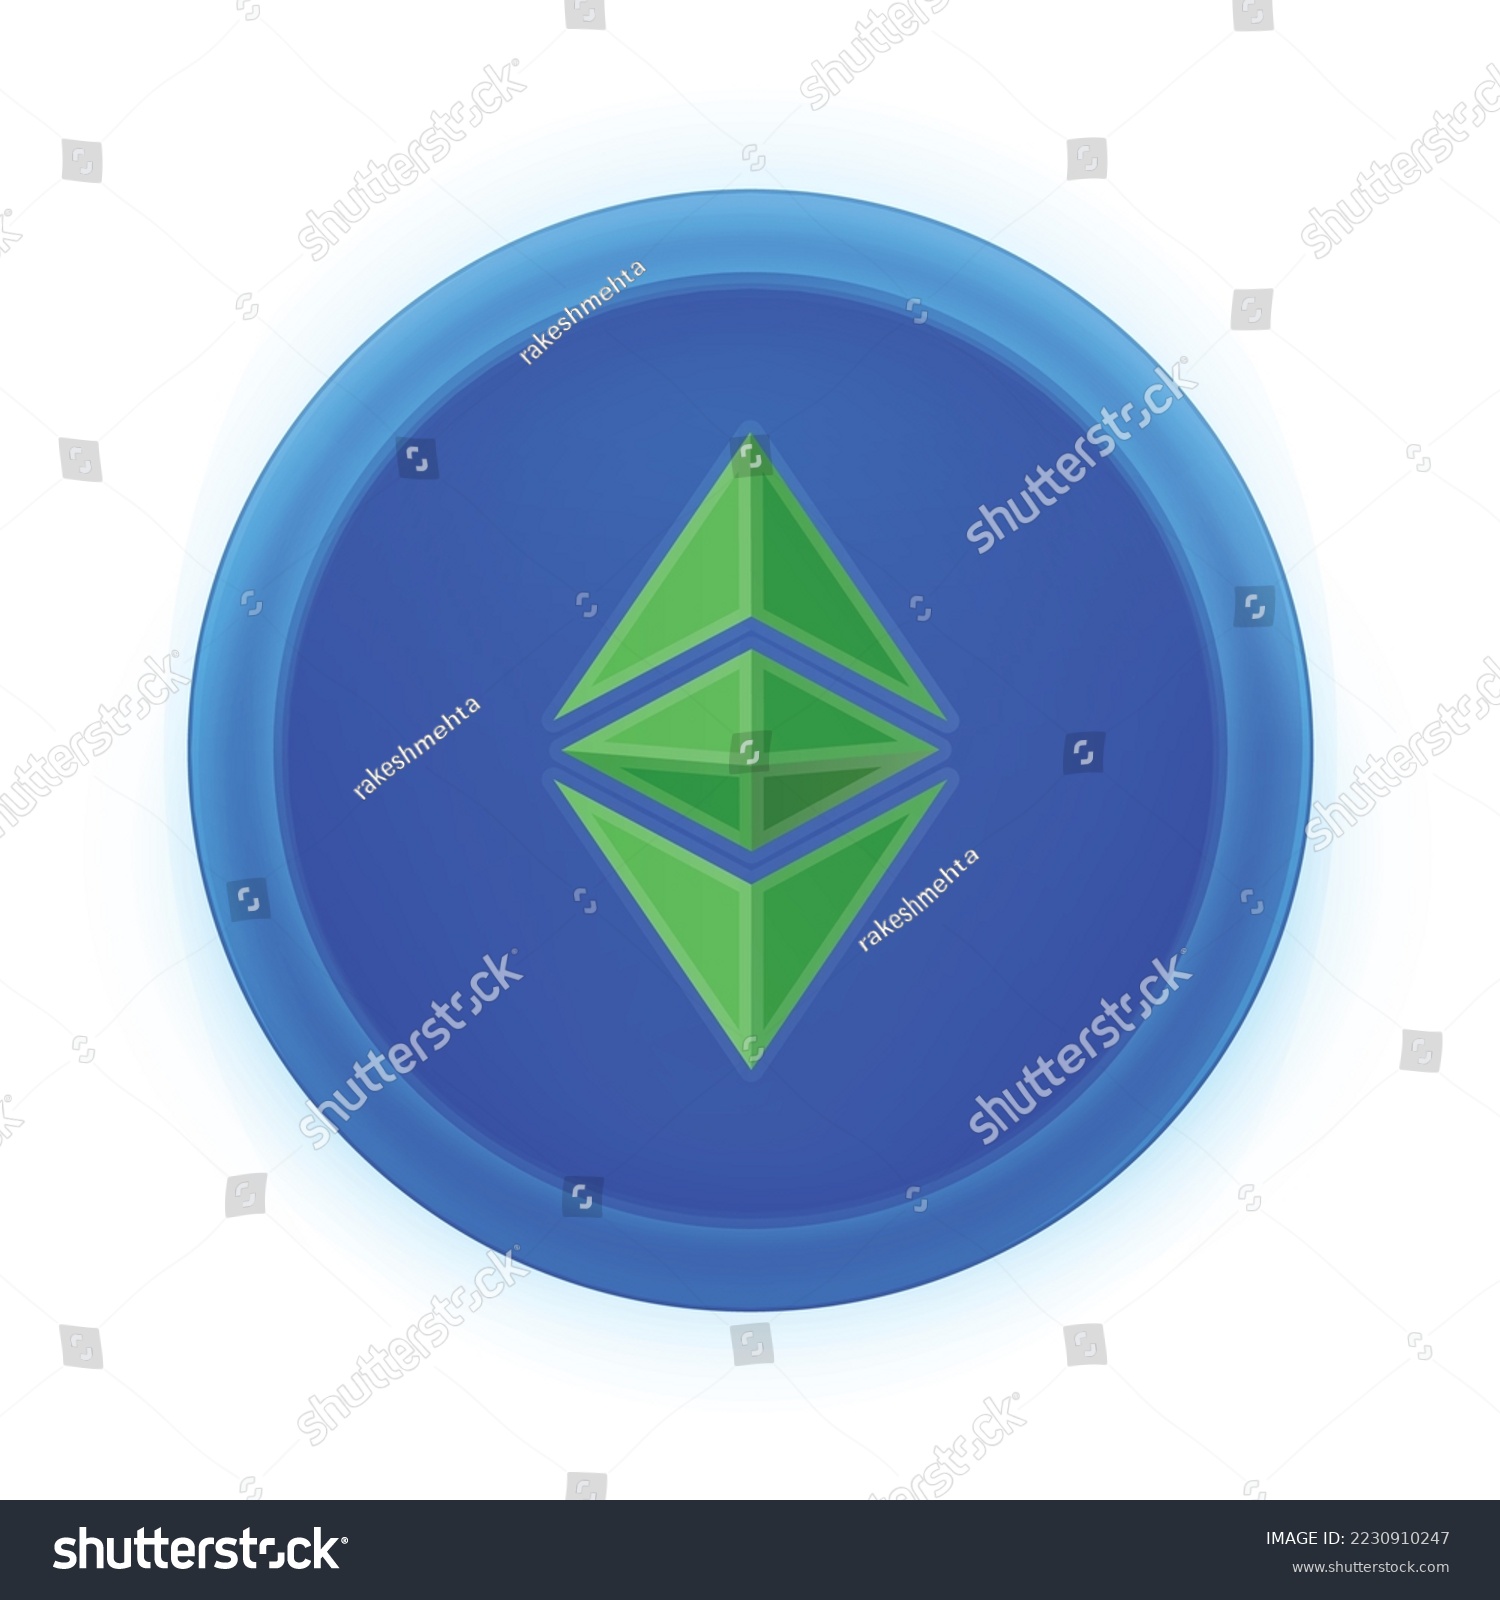 SVG of Ethereum CLassic (ETC) crypto logo isolated on white background. ETC Cryptocurrency coin token vector svg